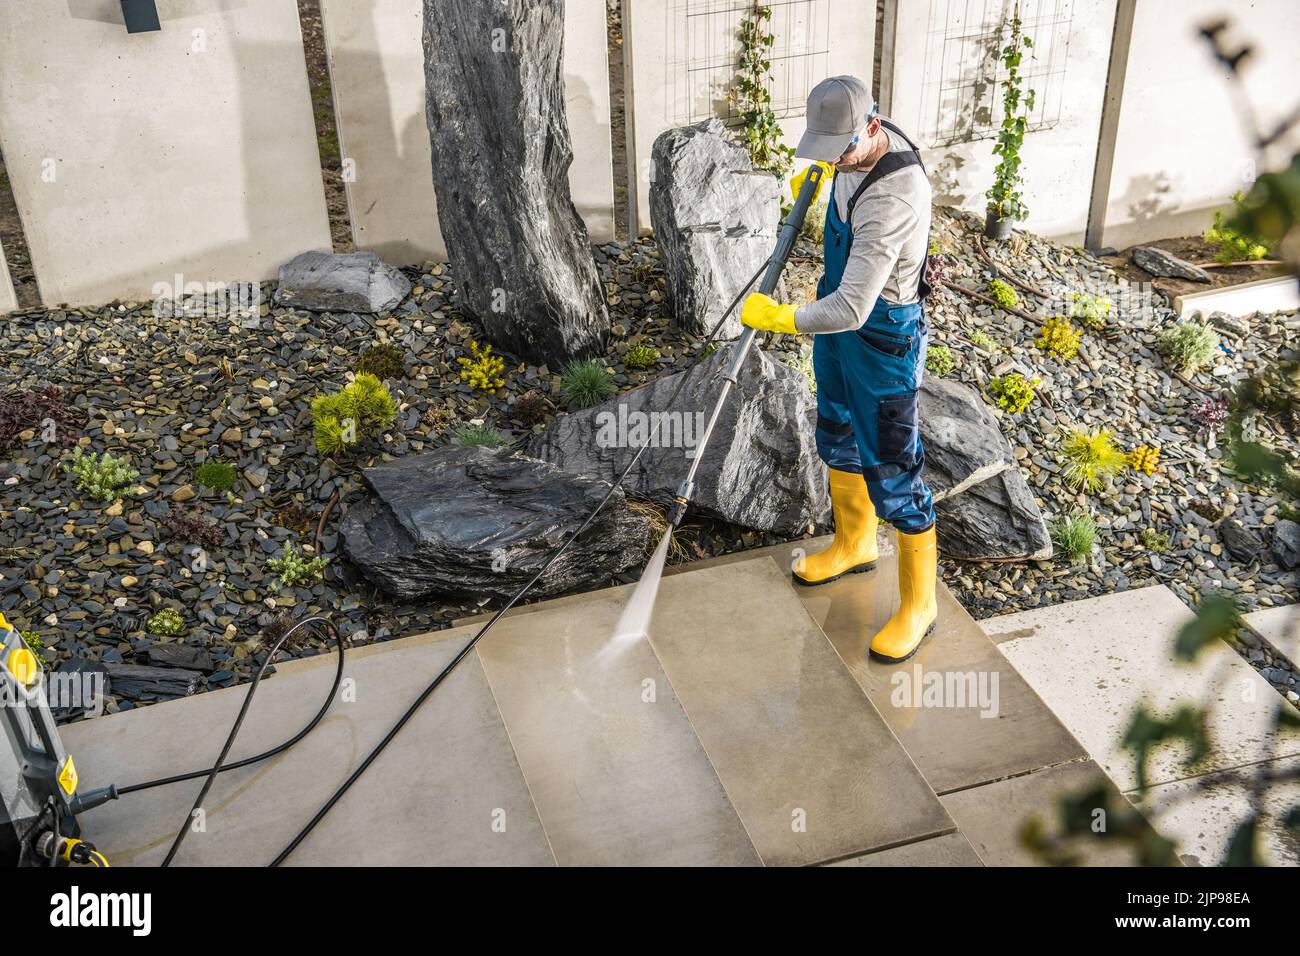 Caucasian Man in Protective Work Wear Cleaning Garden Paths with Pressure Washer. Decorative Stone and Gravel Aggregates in the Background. Spring Sea Stock Photo